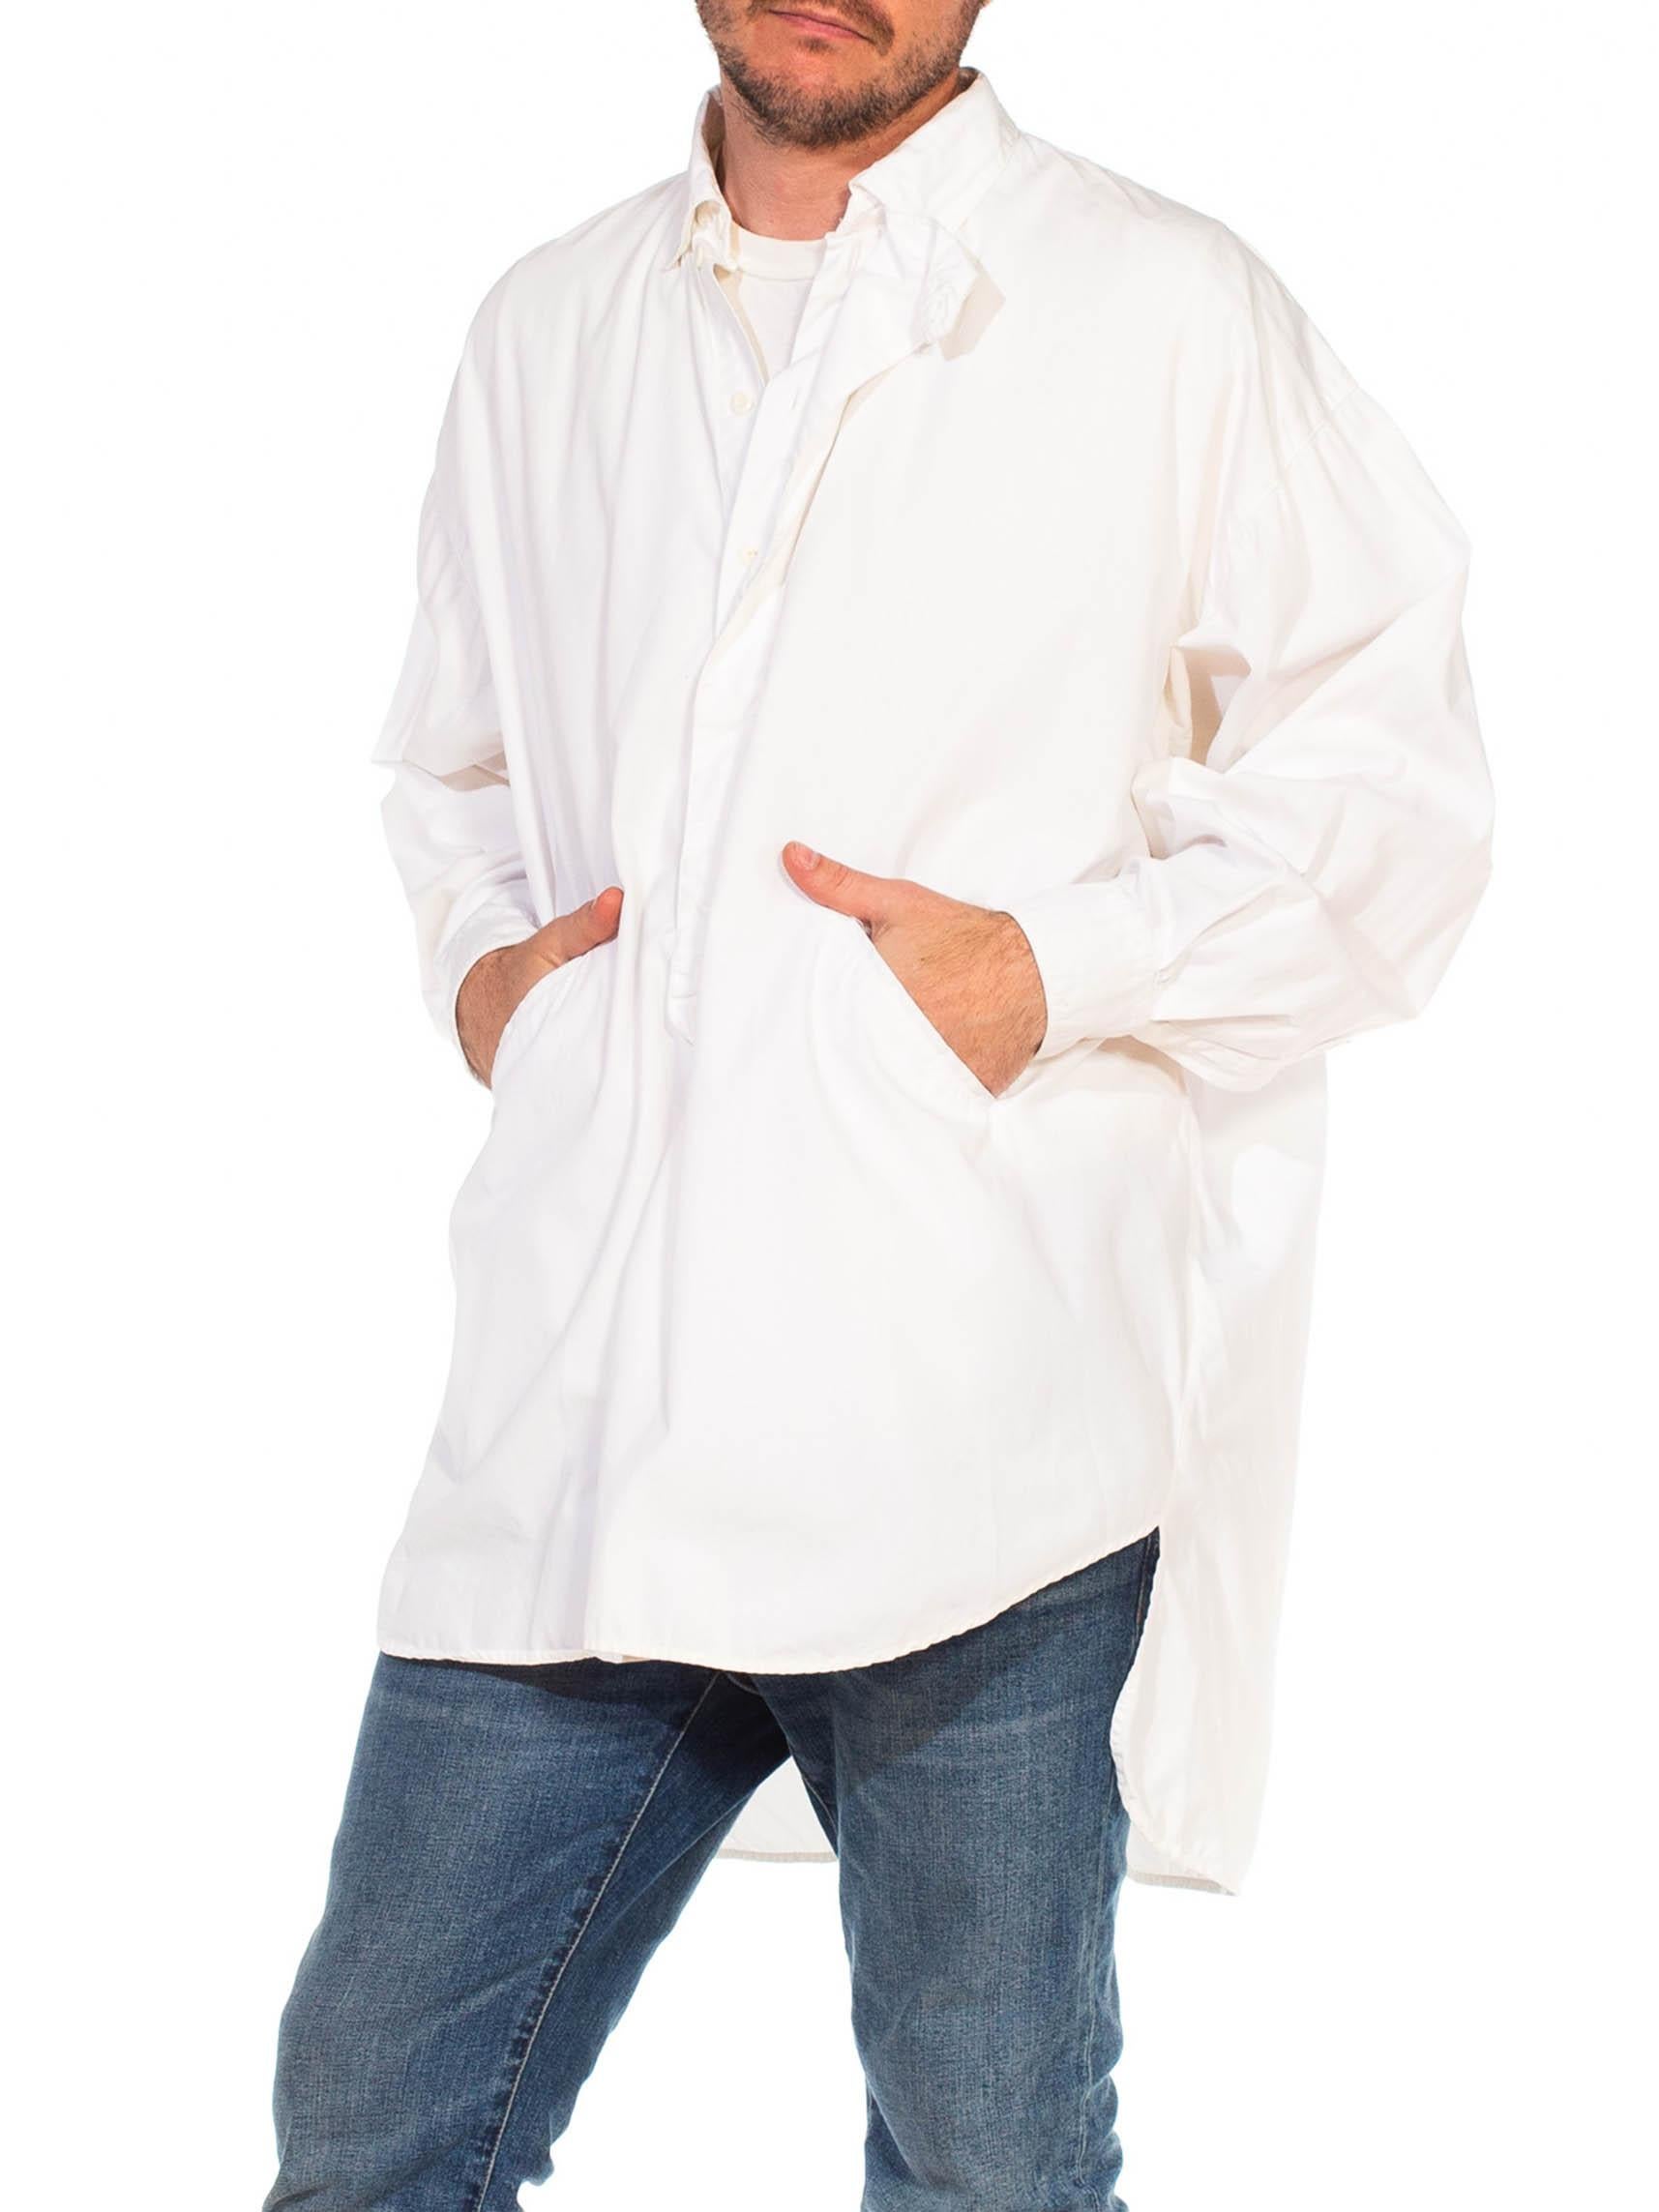 Men's 1980S MARITHE + FRANCOIS GIRBAUD White Cotton Pullover Shirt With Pockets